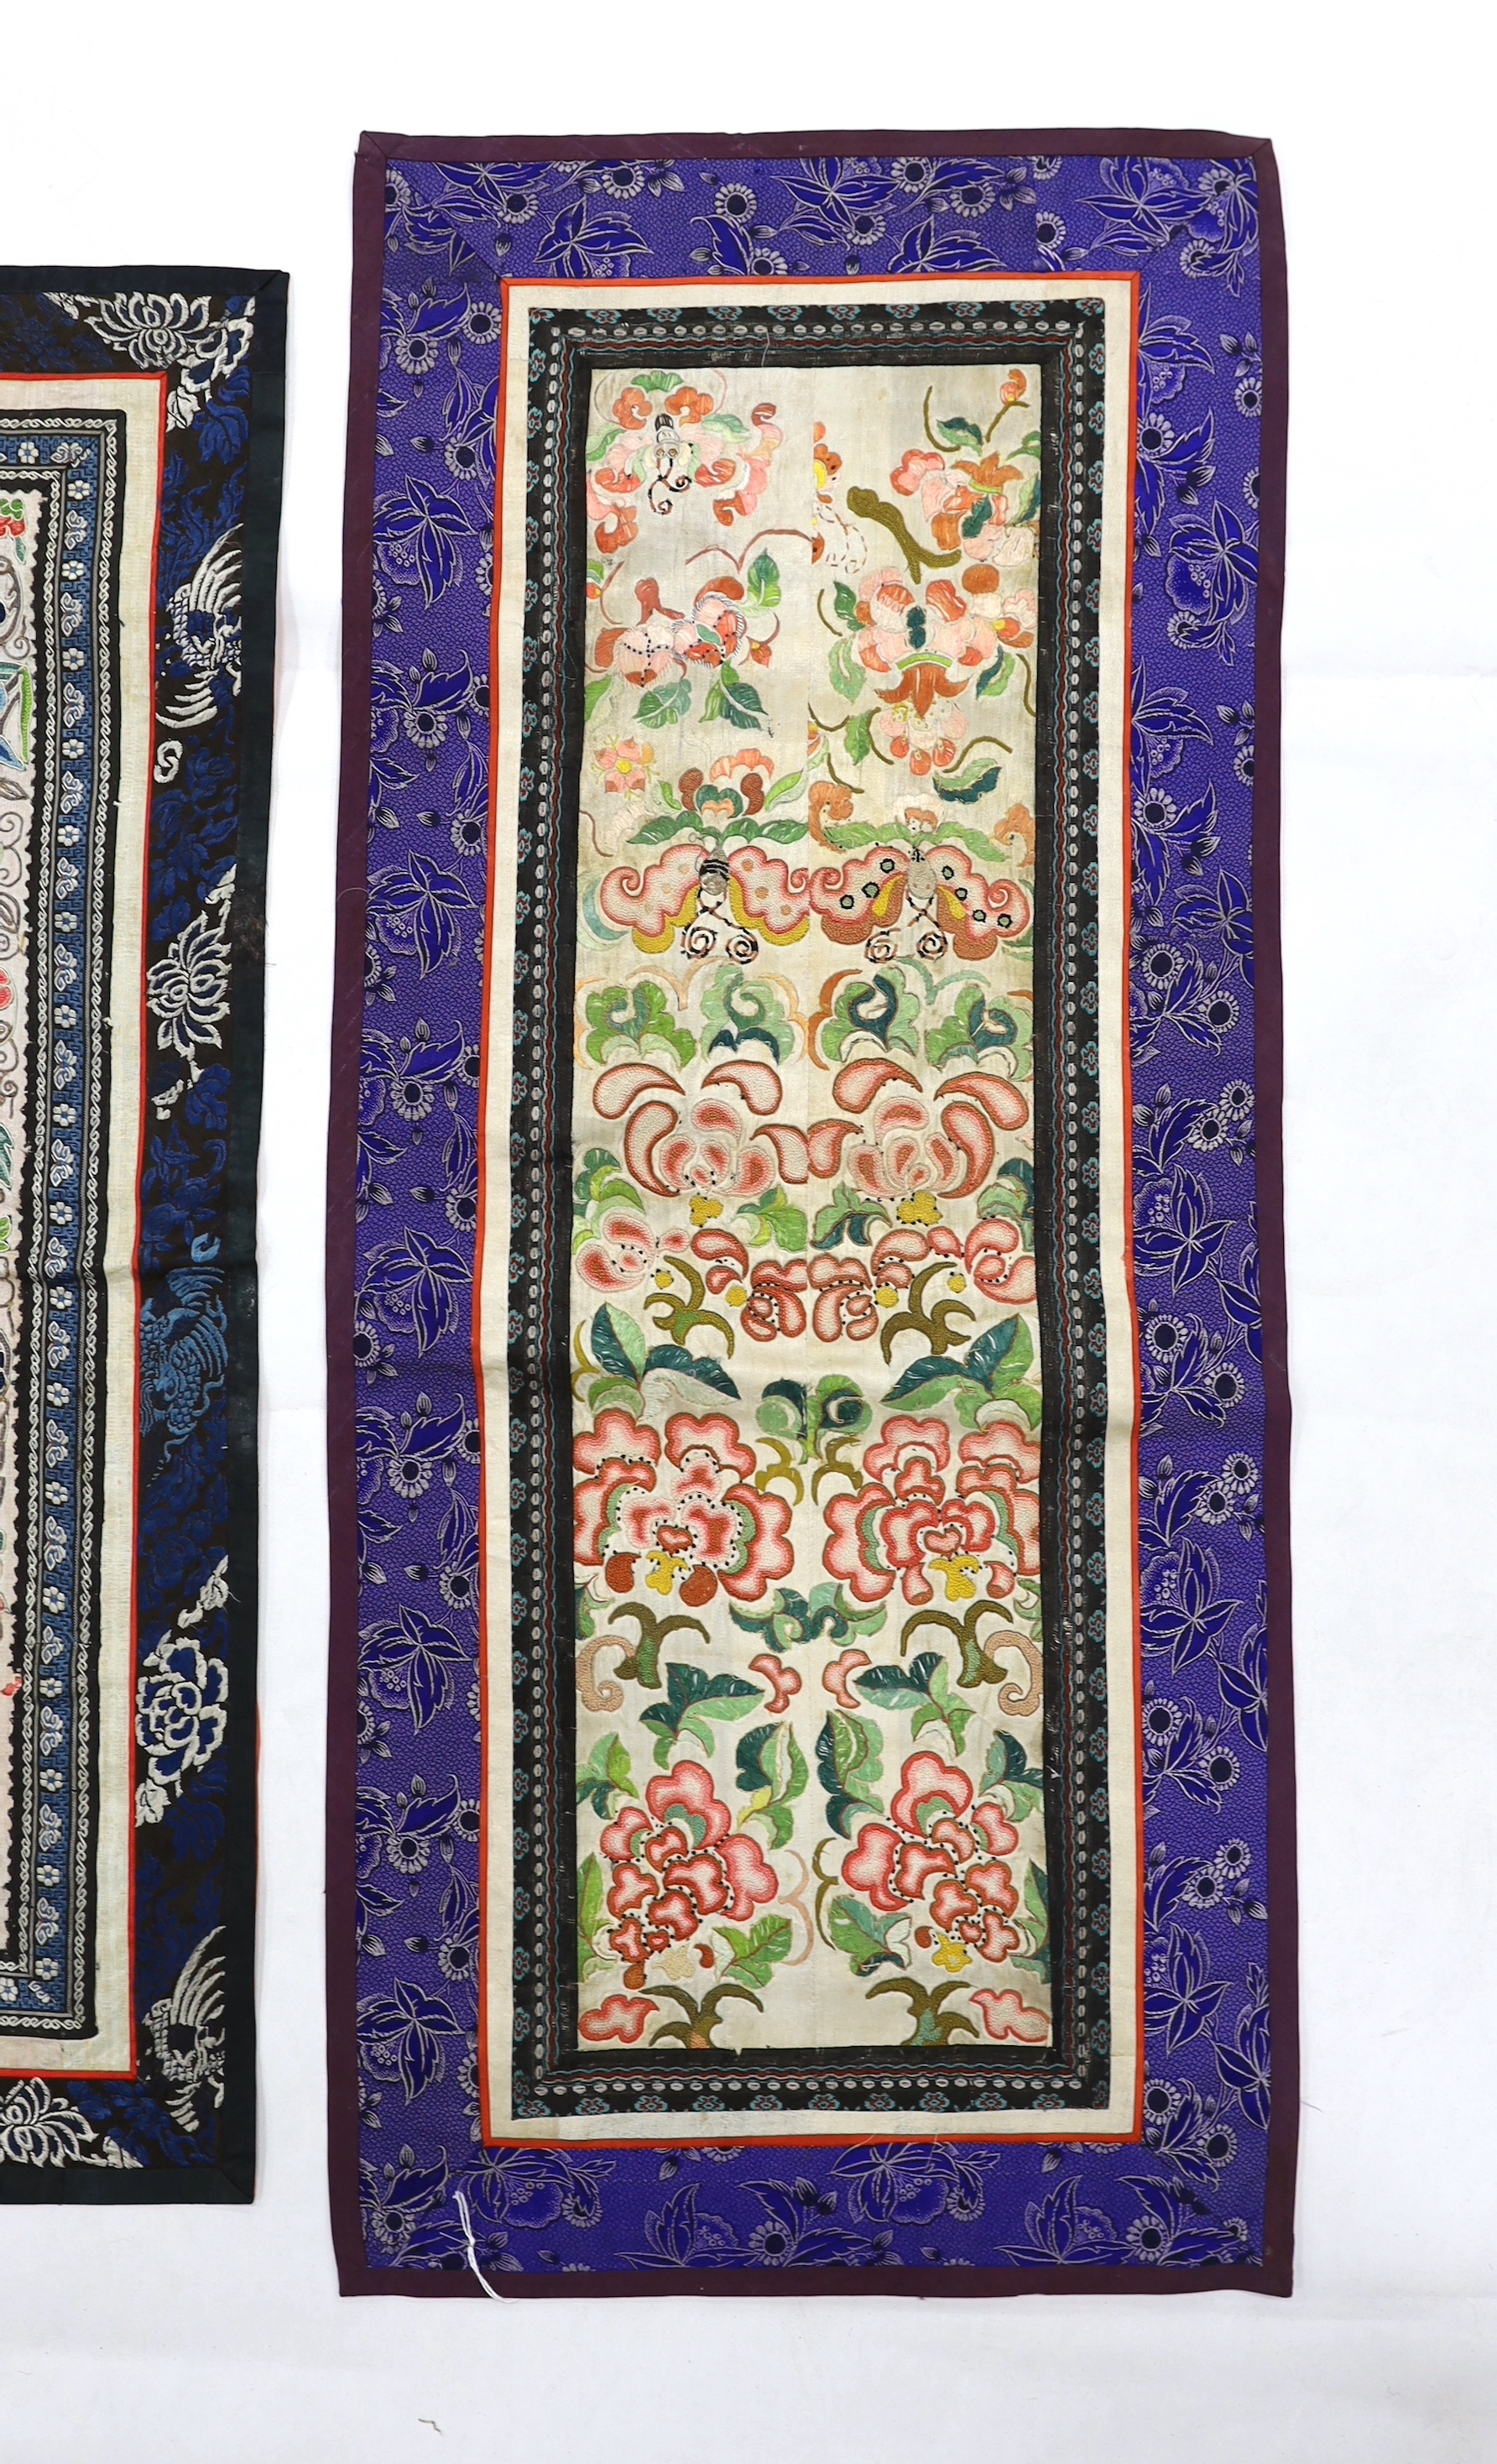 Three Beijing knot pairs of sleeve bands bordered with silk brocade and one pair embroidered with polychrome silks and gold thread longest, 73cm x 32cm including damask border